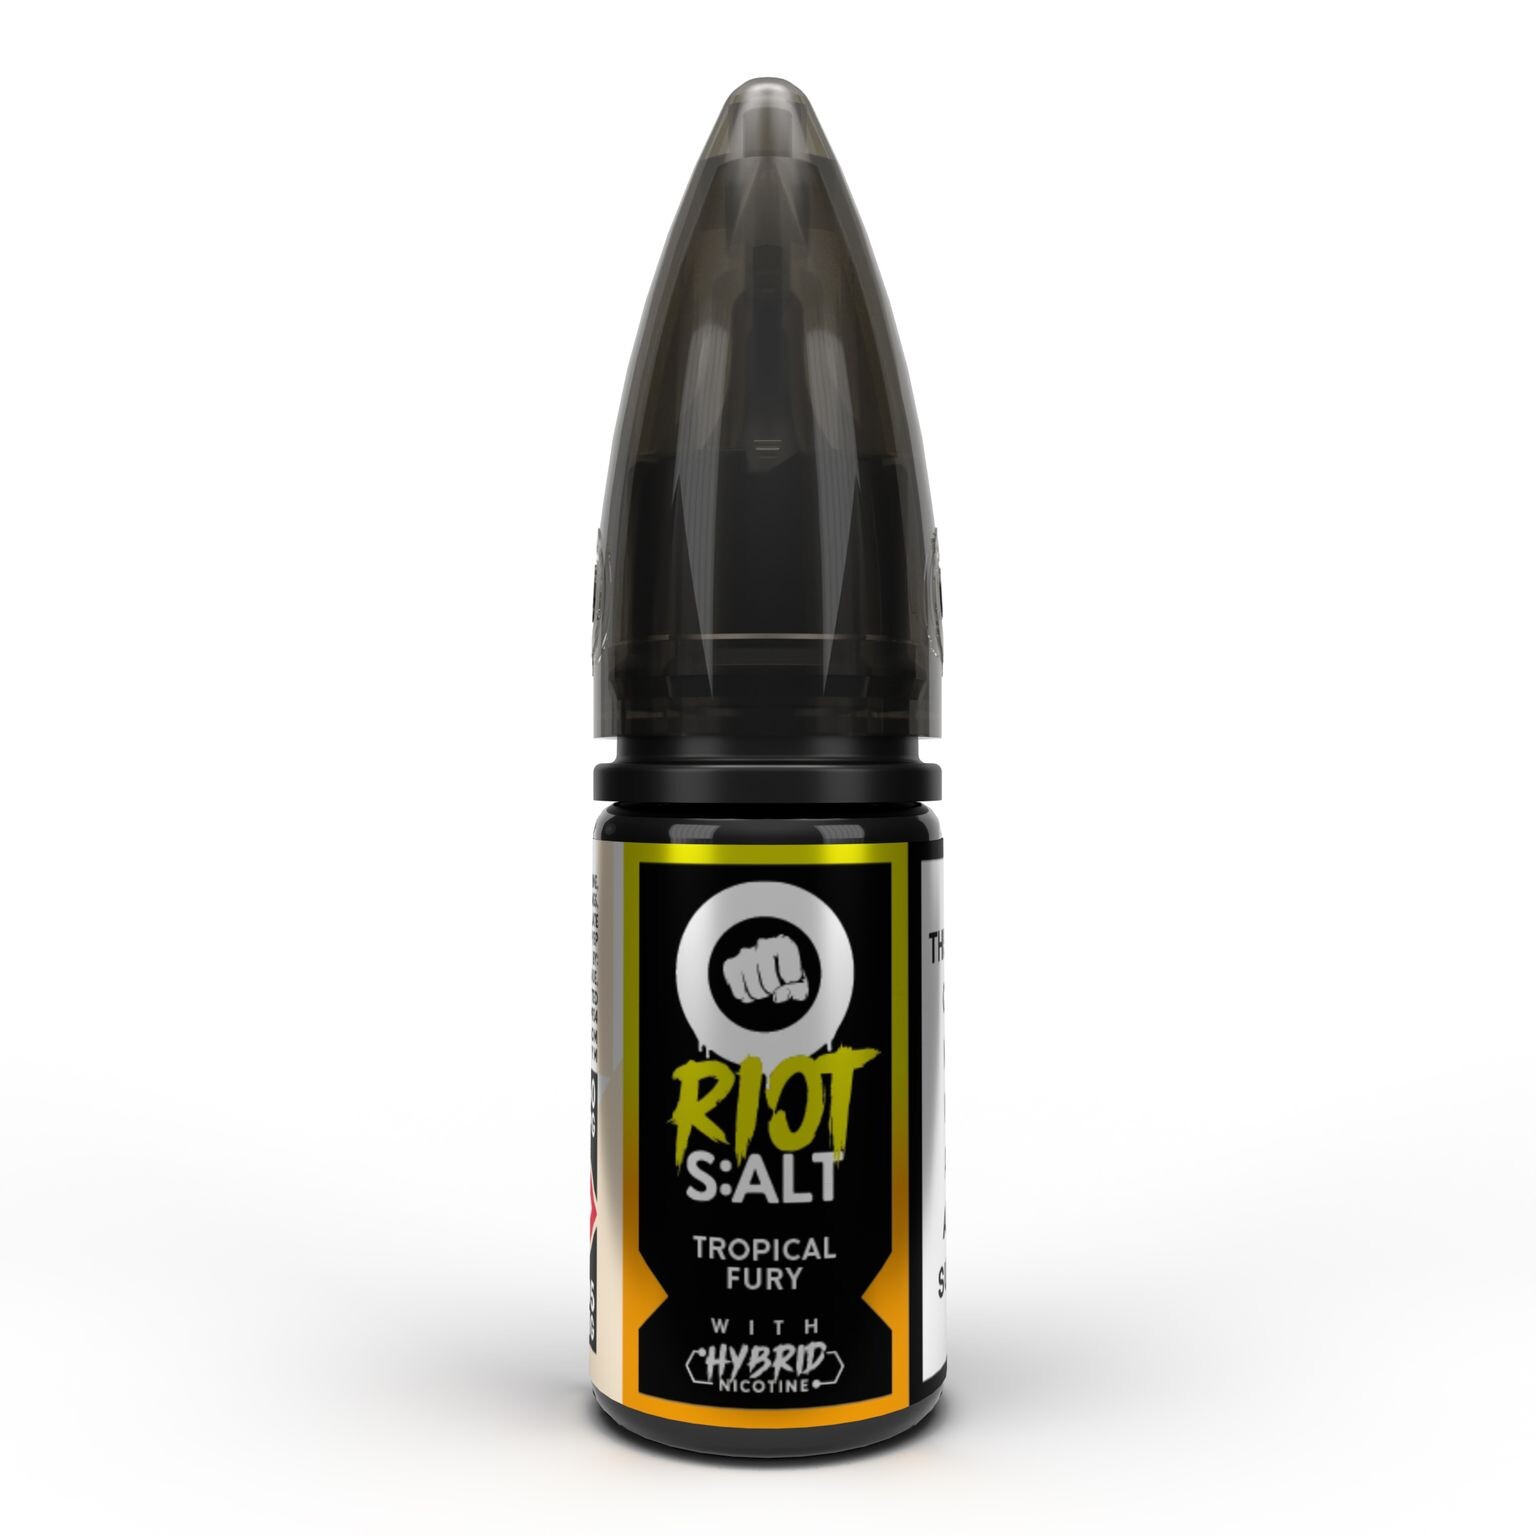 Riot salt tropical fury with hybrid nicotine 10ml, available at dispergo vaping uk